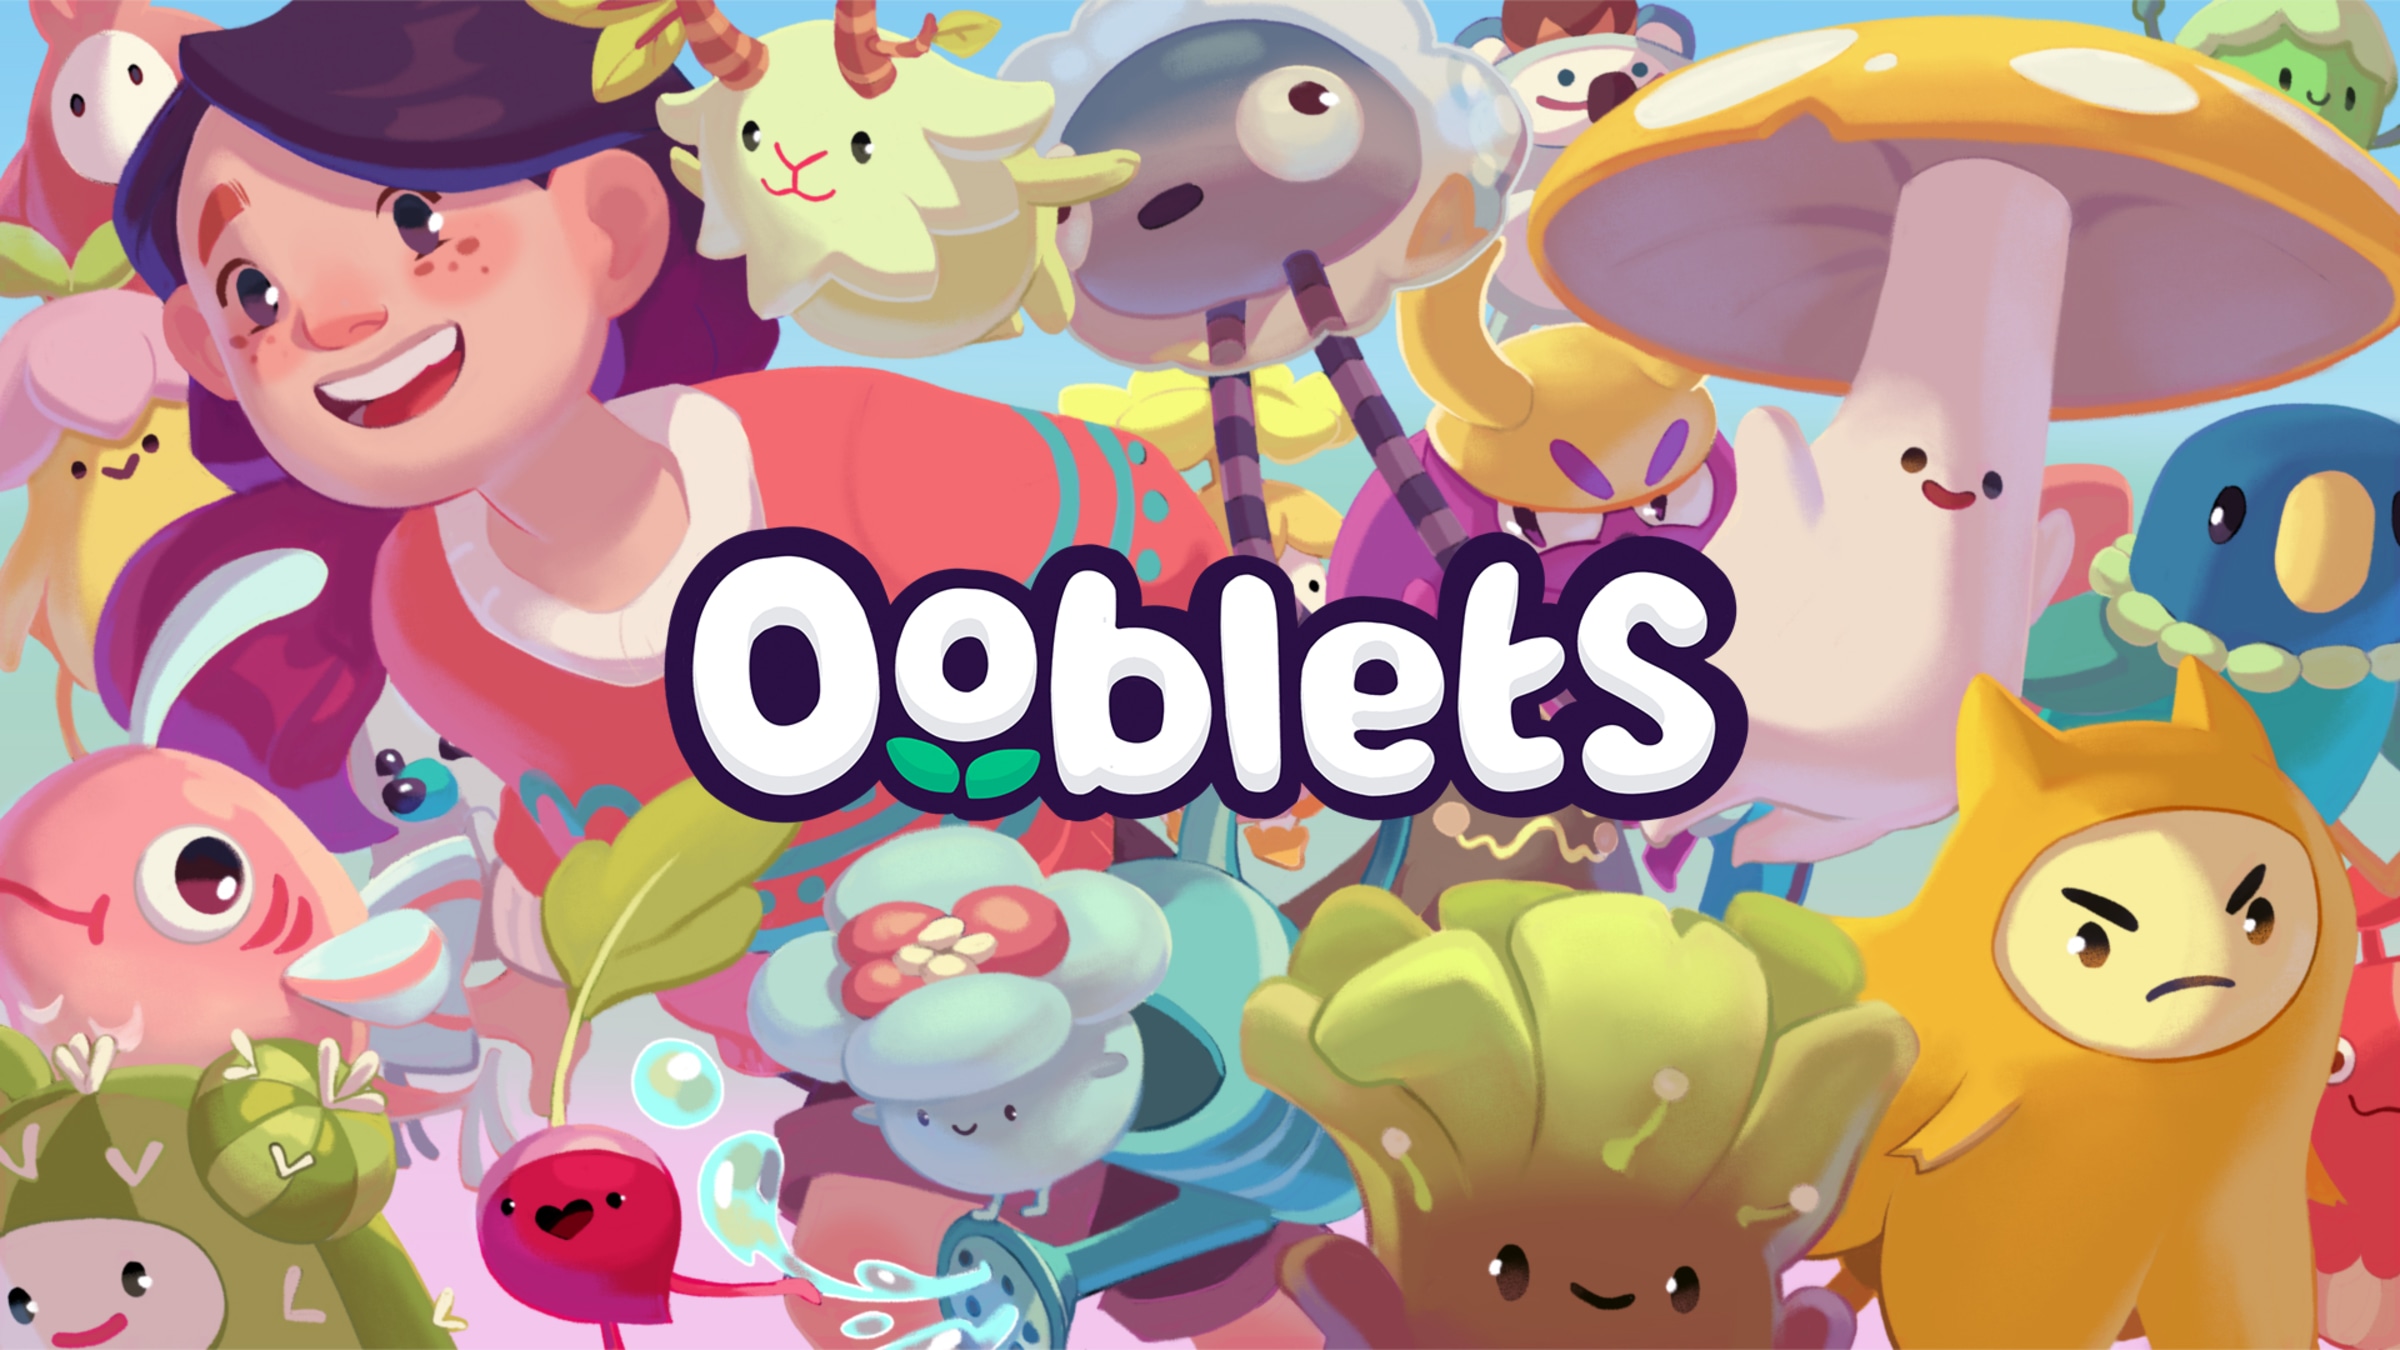 Ooblets for Nintendo Switch - Nintendo Official Site